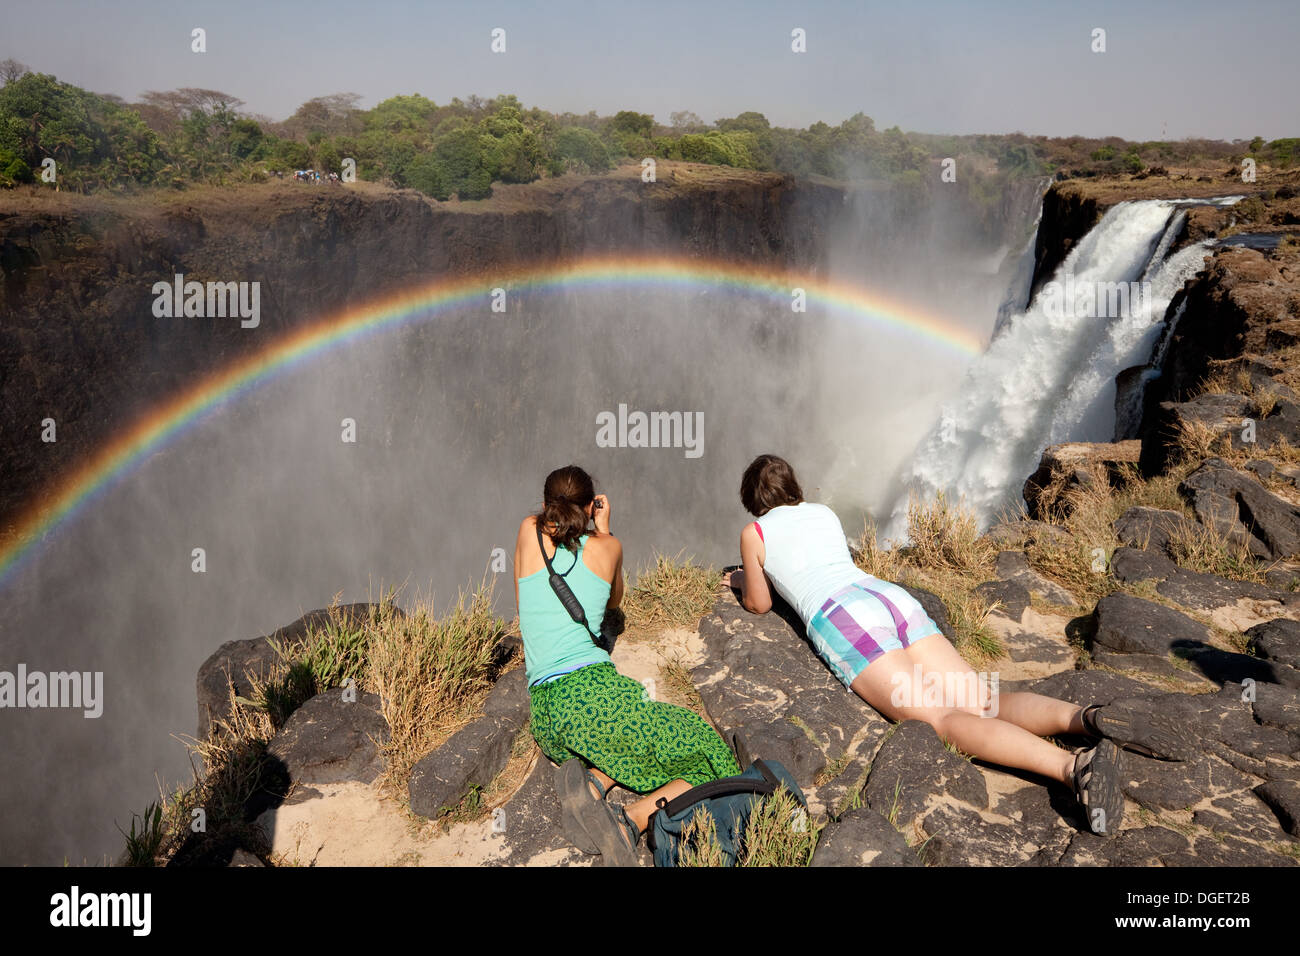 Victoria Falls Zambia; Two women tourists looking over the edge at the Victoria Falls with rainbow, Zambia side, Livingstone Island, Zambia Africa Stock Photo